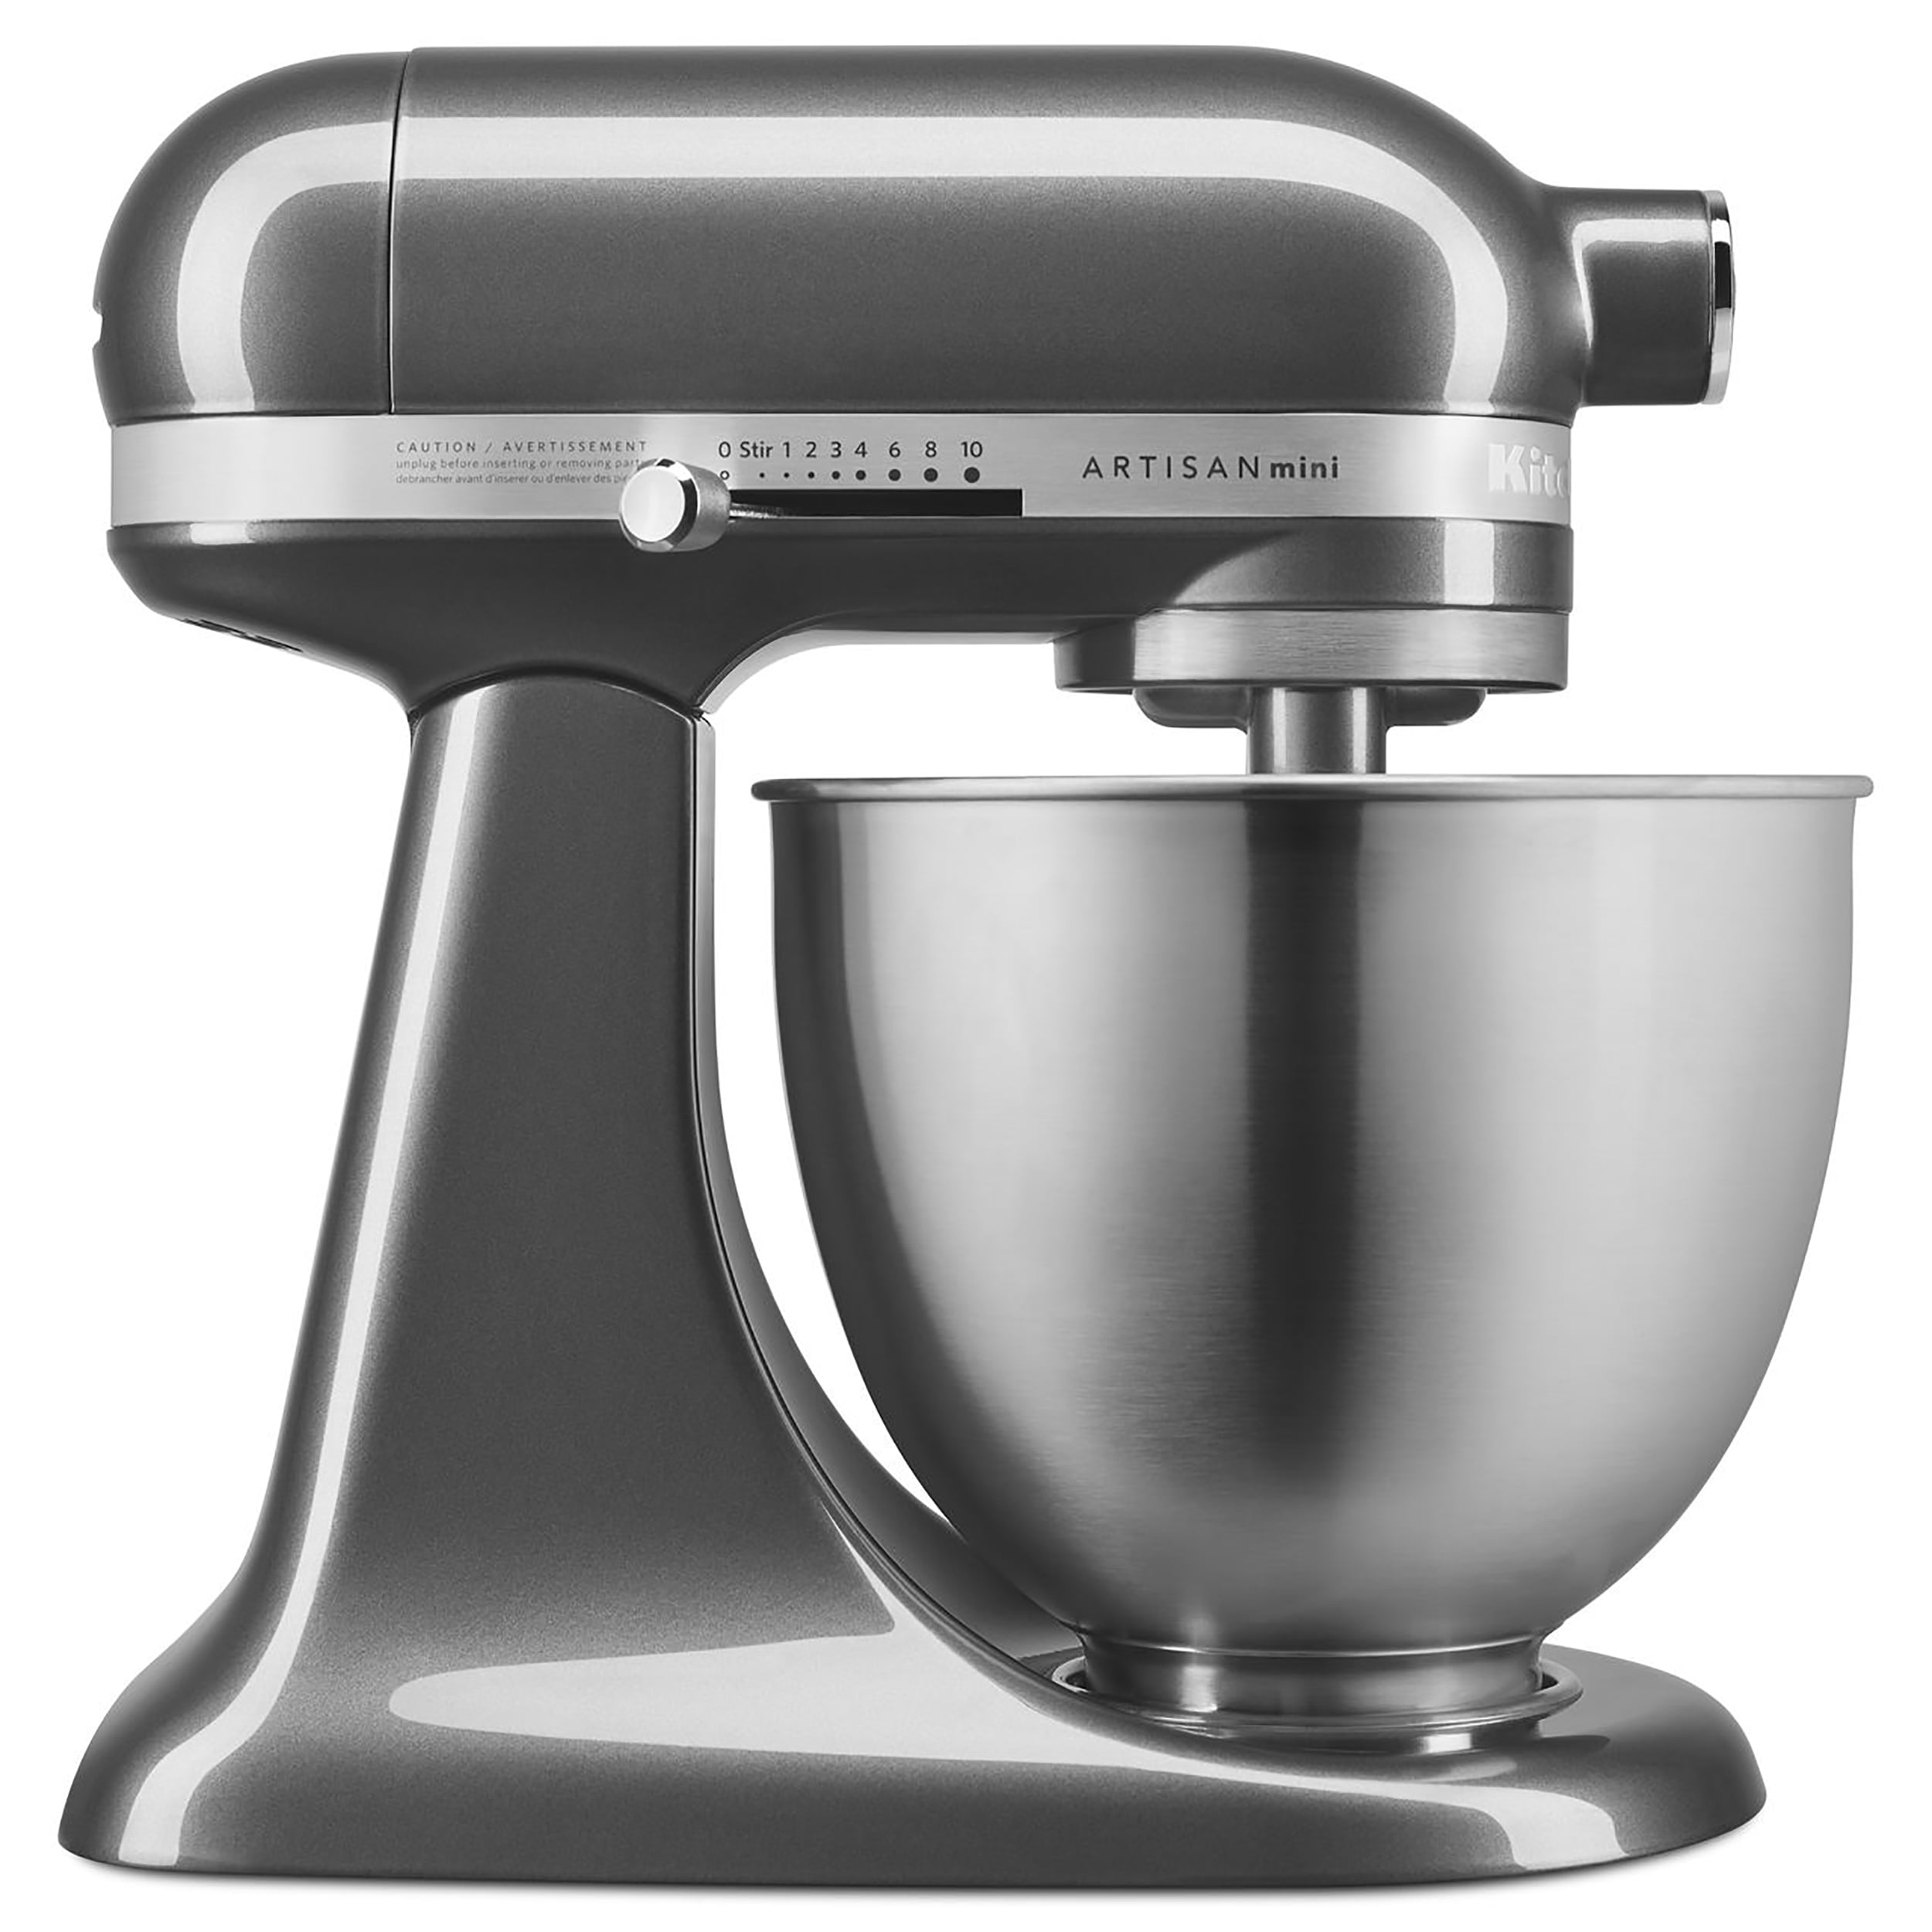 KitchenAid 4.5 Quart Tilt Head Stand Mixer in Onyx Black and Stainless  Steel